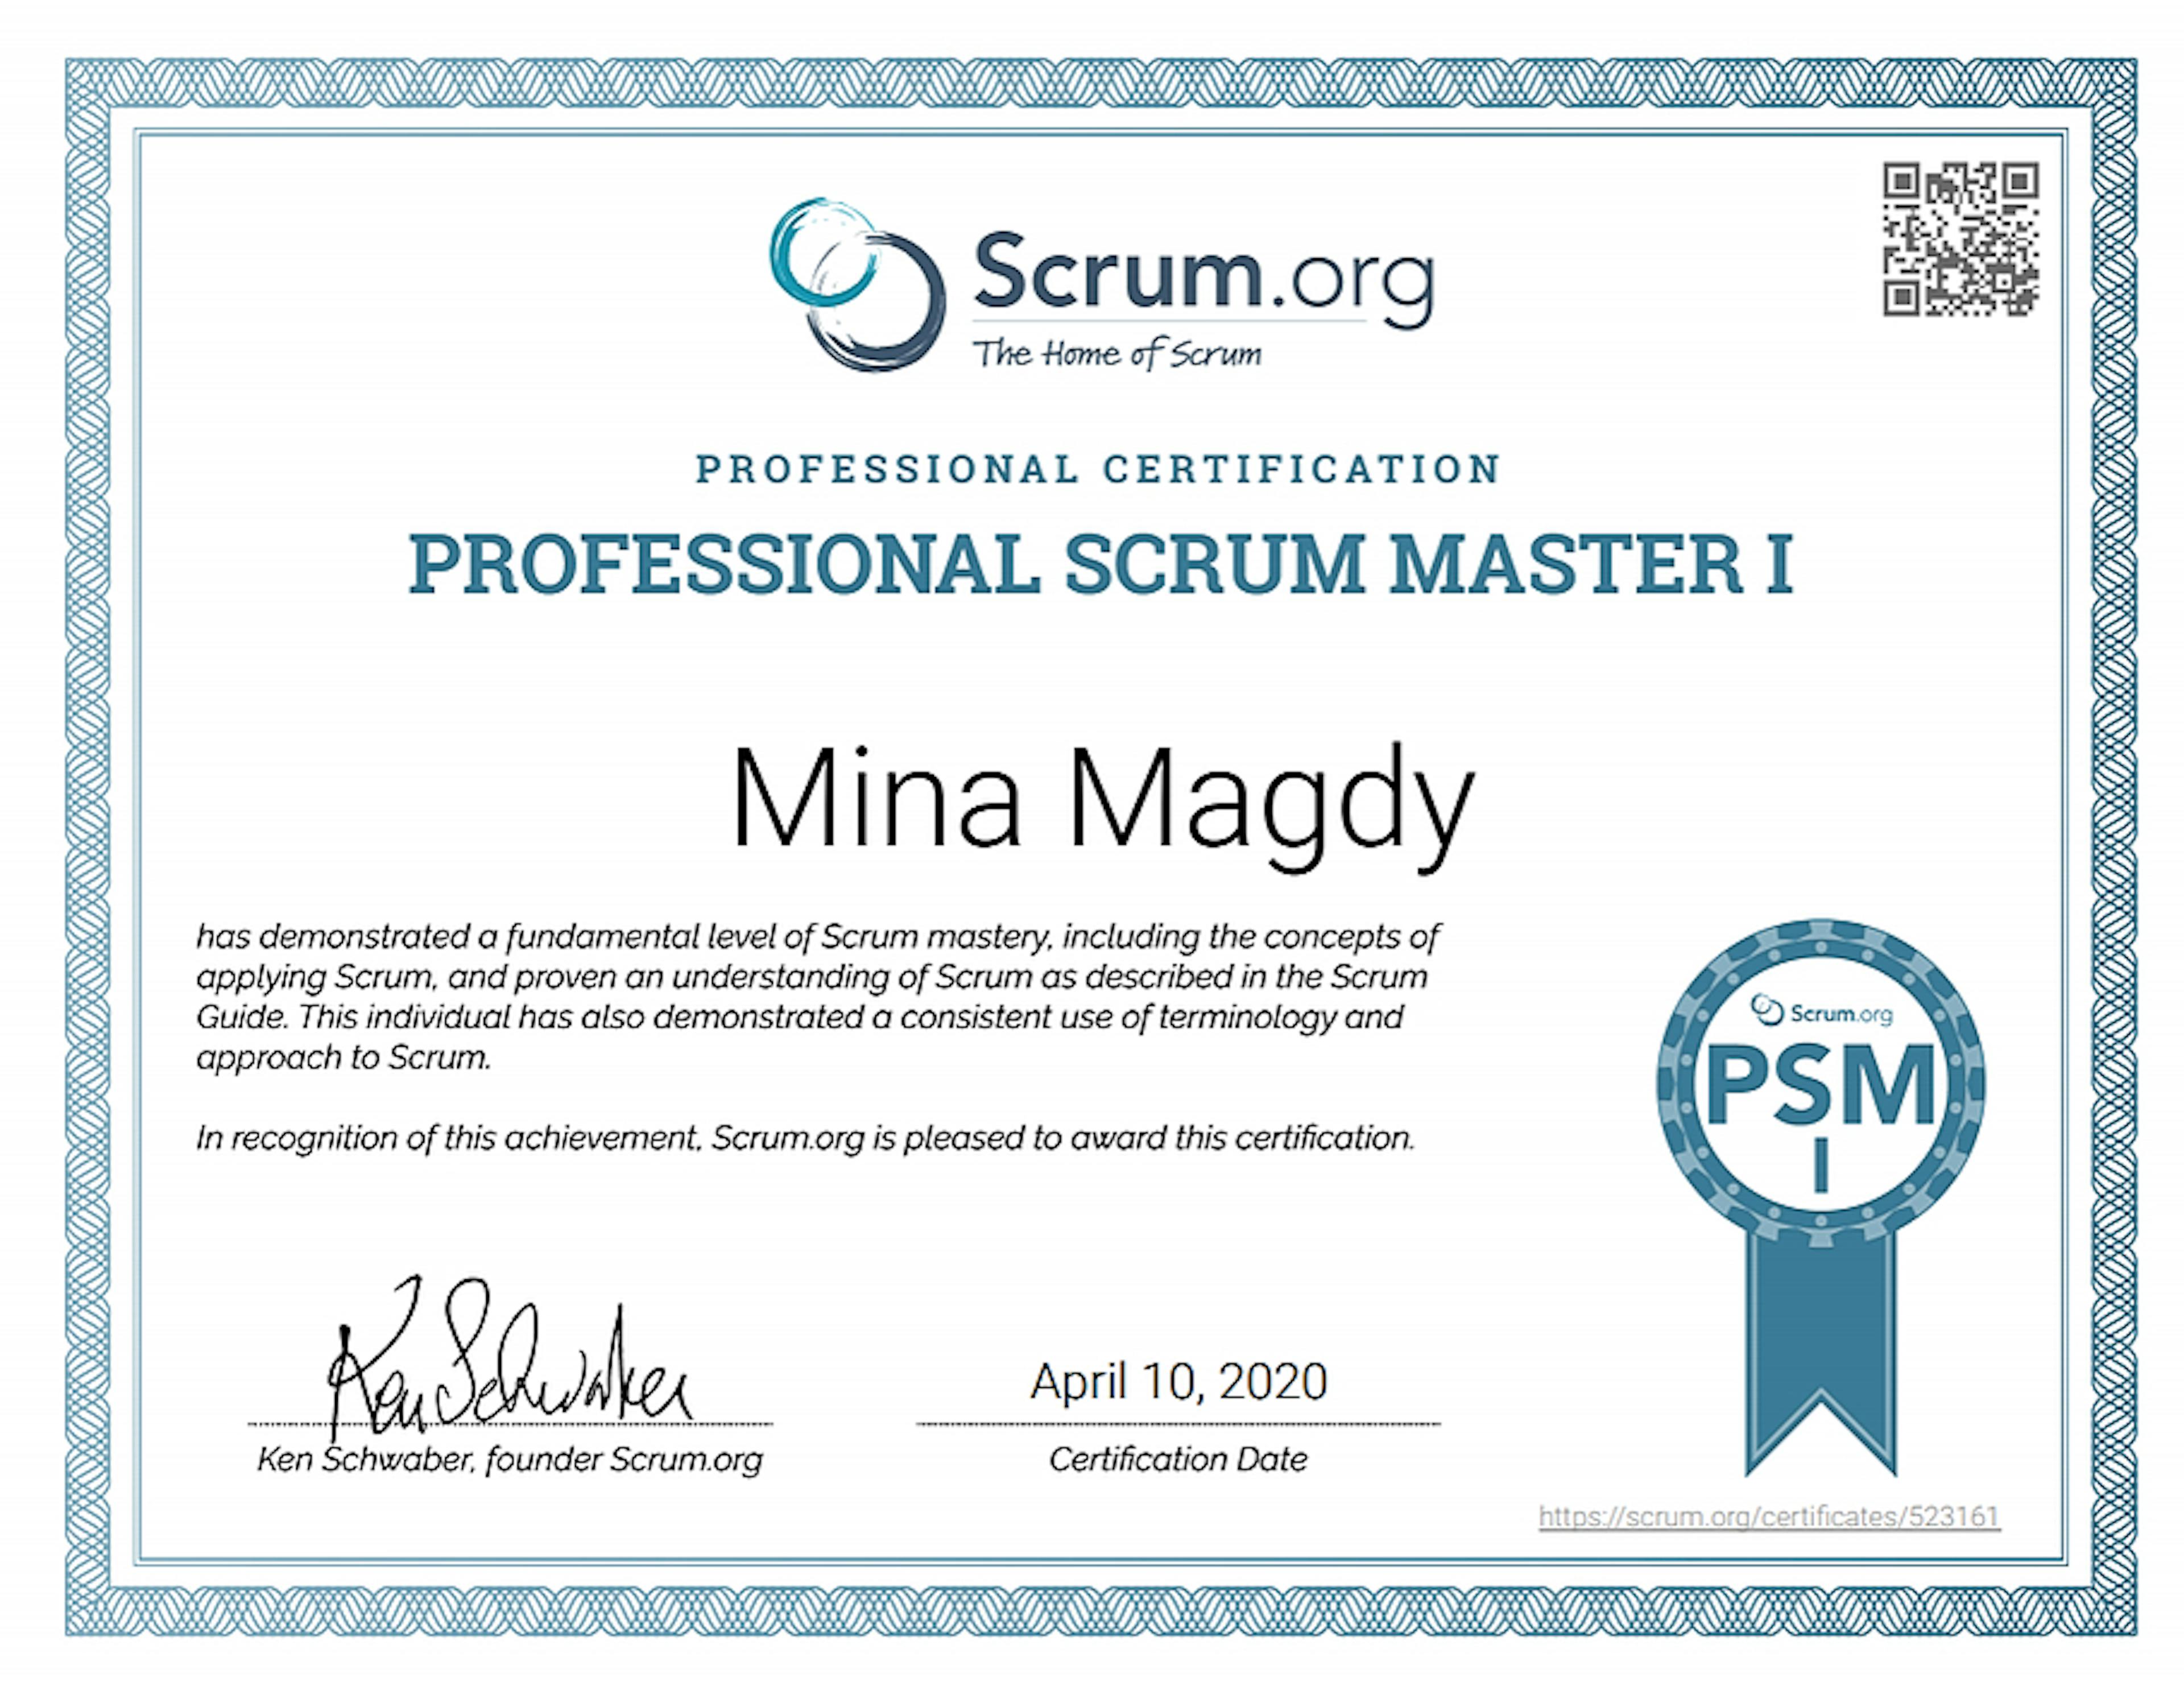 /become-professional-scrum-master-i-psm-i-and-learn-how-scrum-really-works-b7bh3w96 feature image